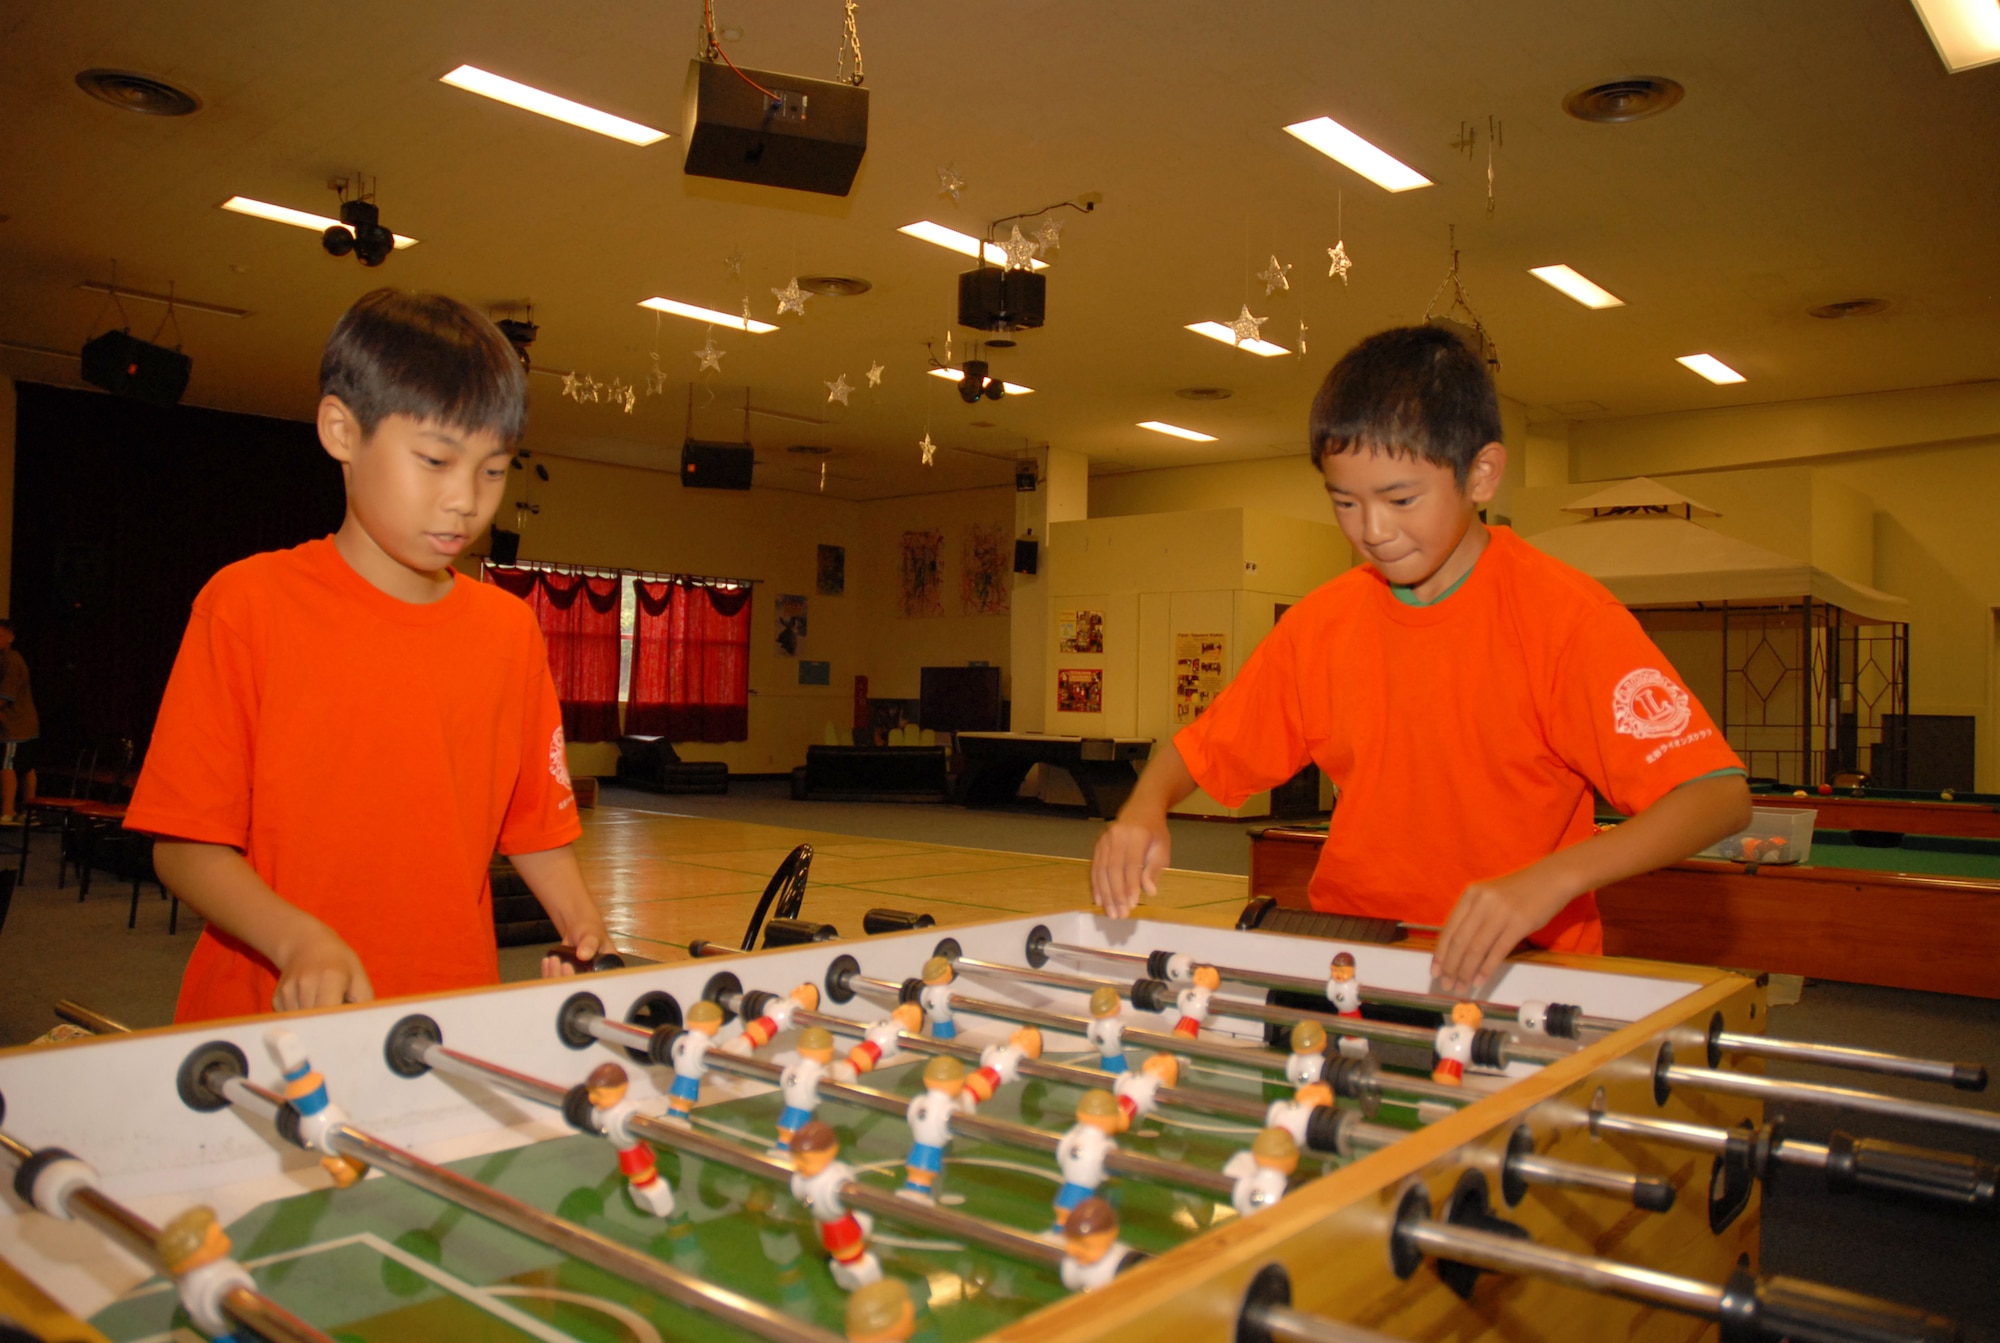 Ren Ishimoto (left) and Kenwa Maeshiro play foosball at the Kadena youth center during an international lock-in August 2. The children spent the night playing games, sampling American and Japanese cuisine and making new friends. (U.S. Air Force photo/Staff Sgt. Angelique Perez)